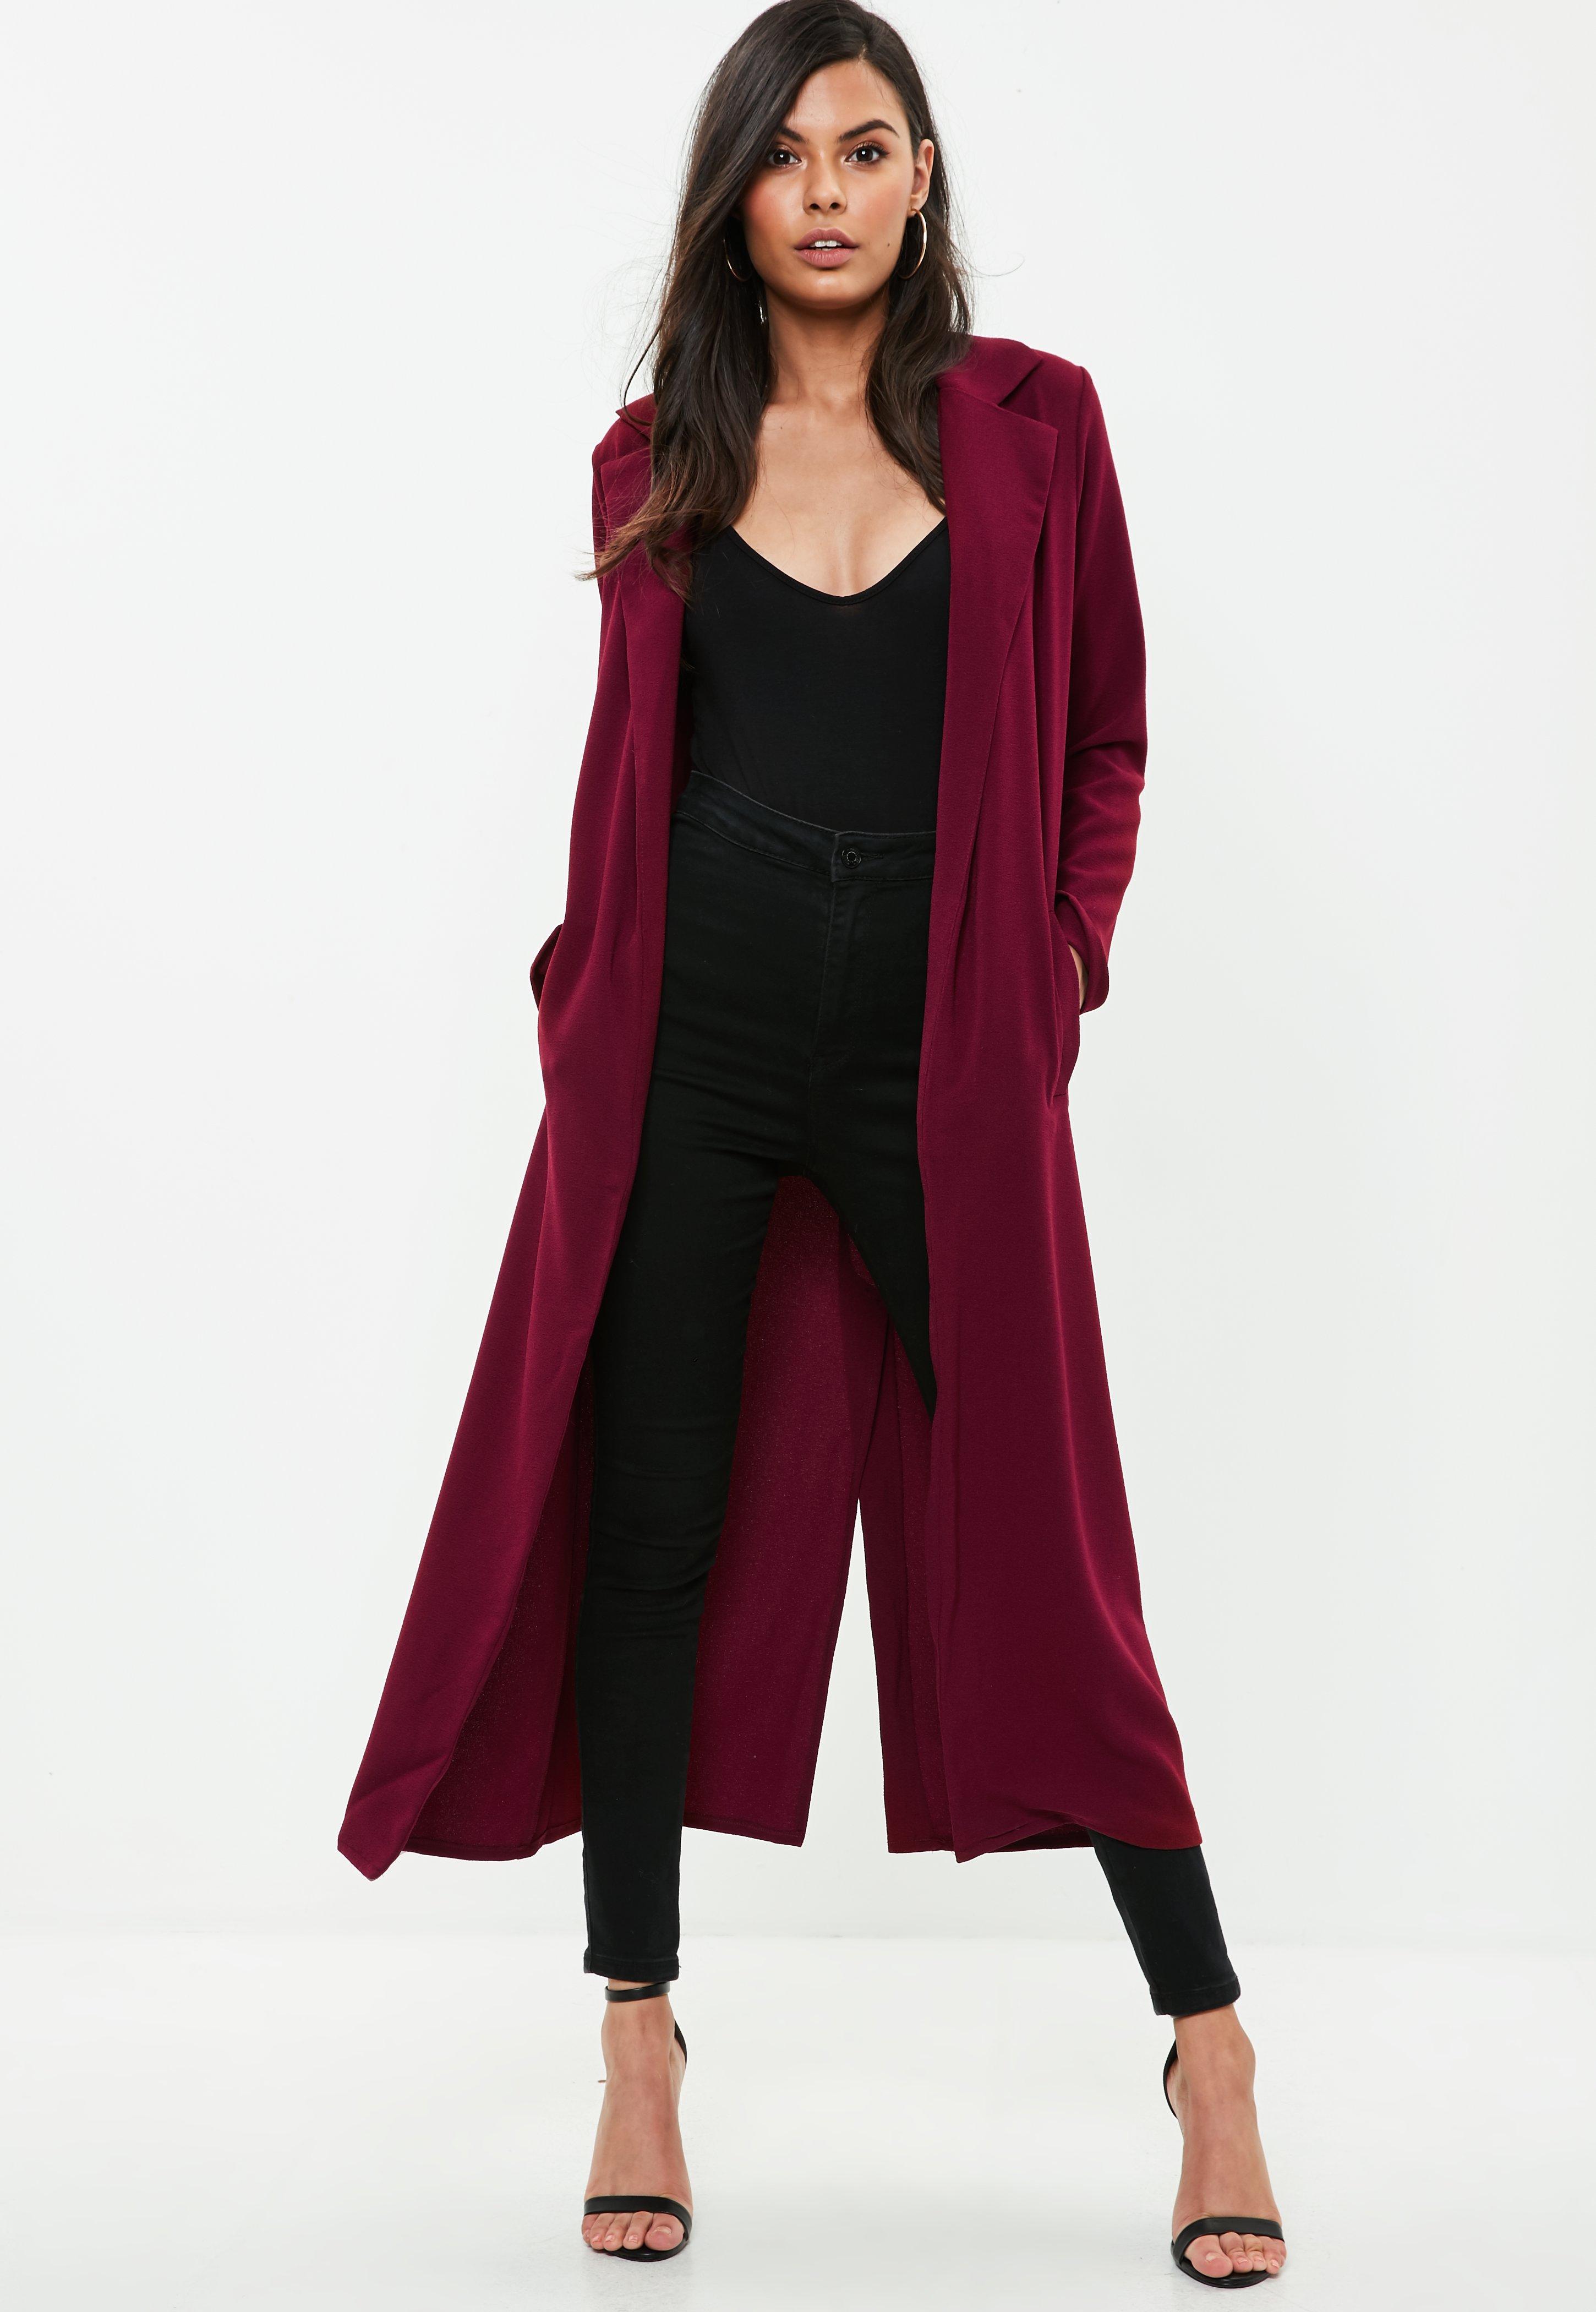 Lyst - Missguided Burgundy Long Sleeved Maxi Duster Jacket in Red